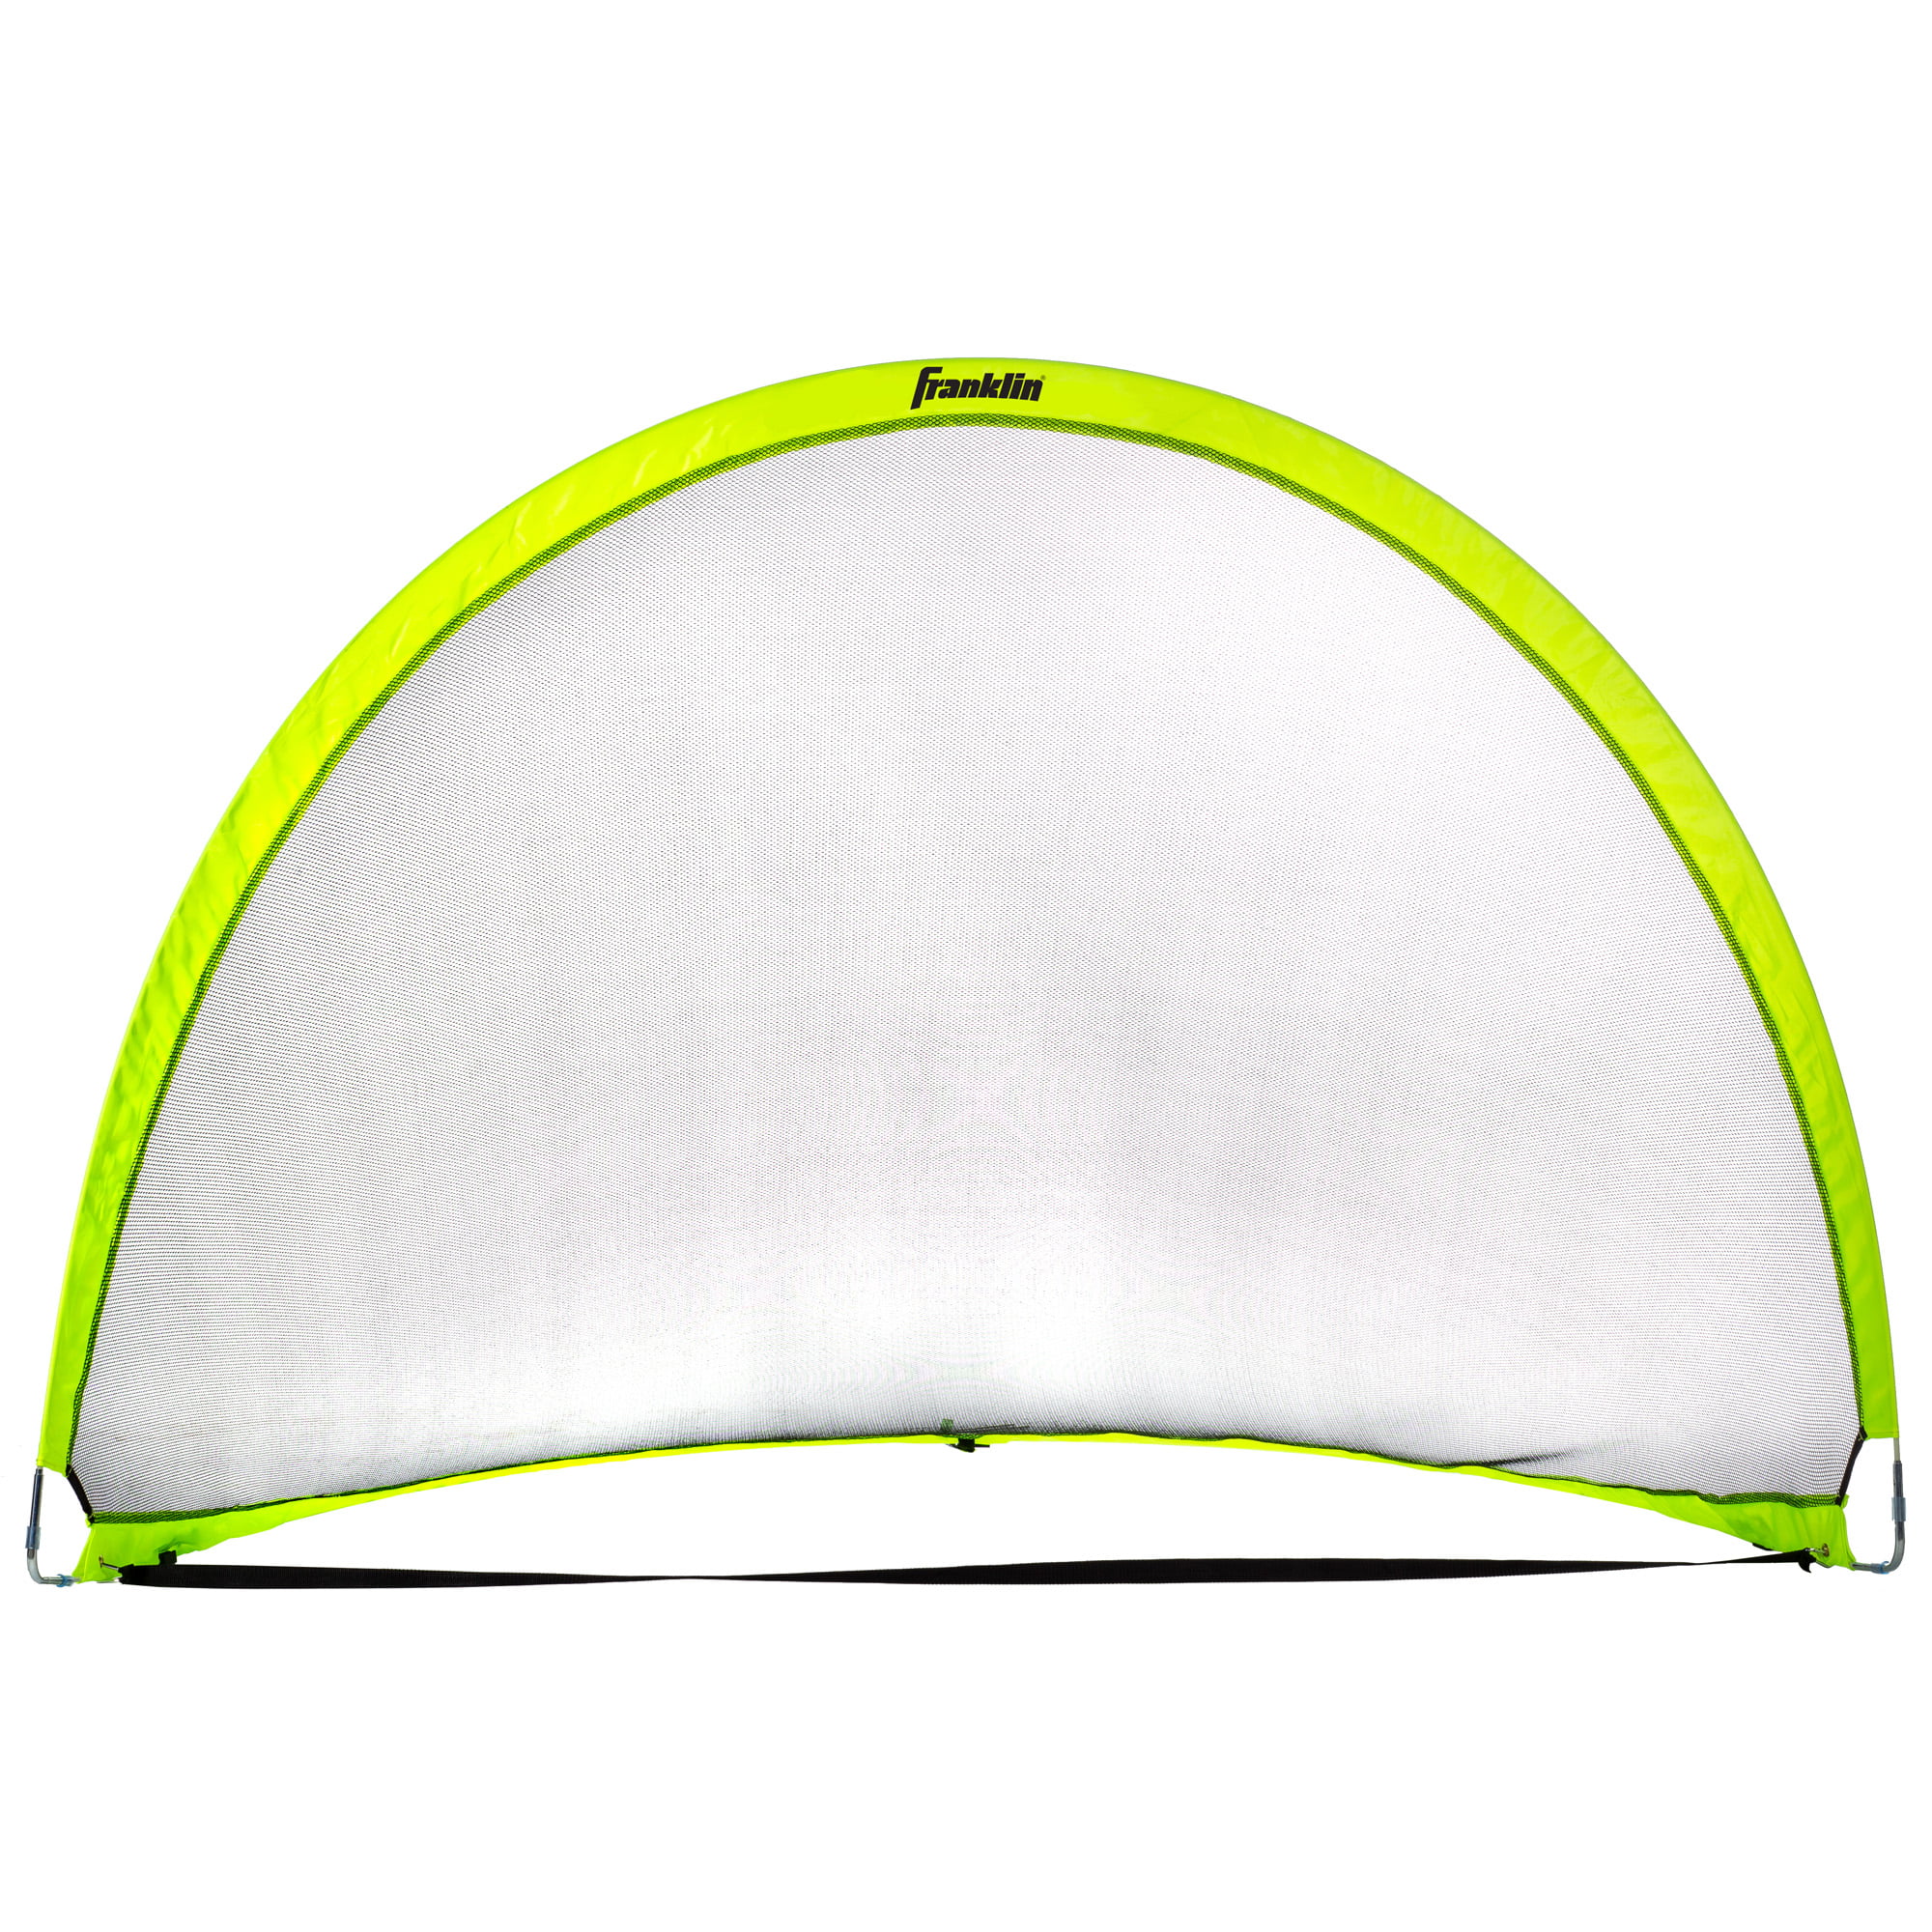 6ft x 4ft Franklin Sports Portable Pop-Up Dome Soccer Goal & Carry Bag 